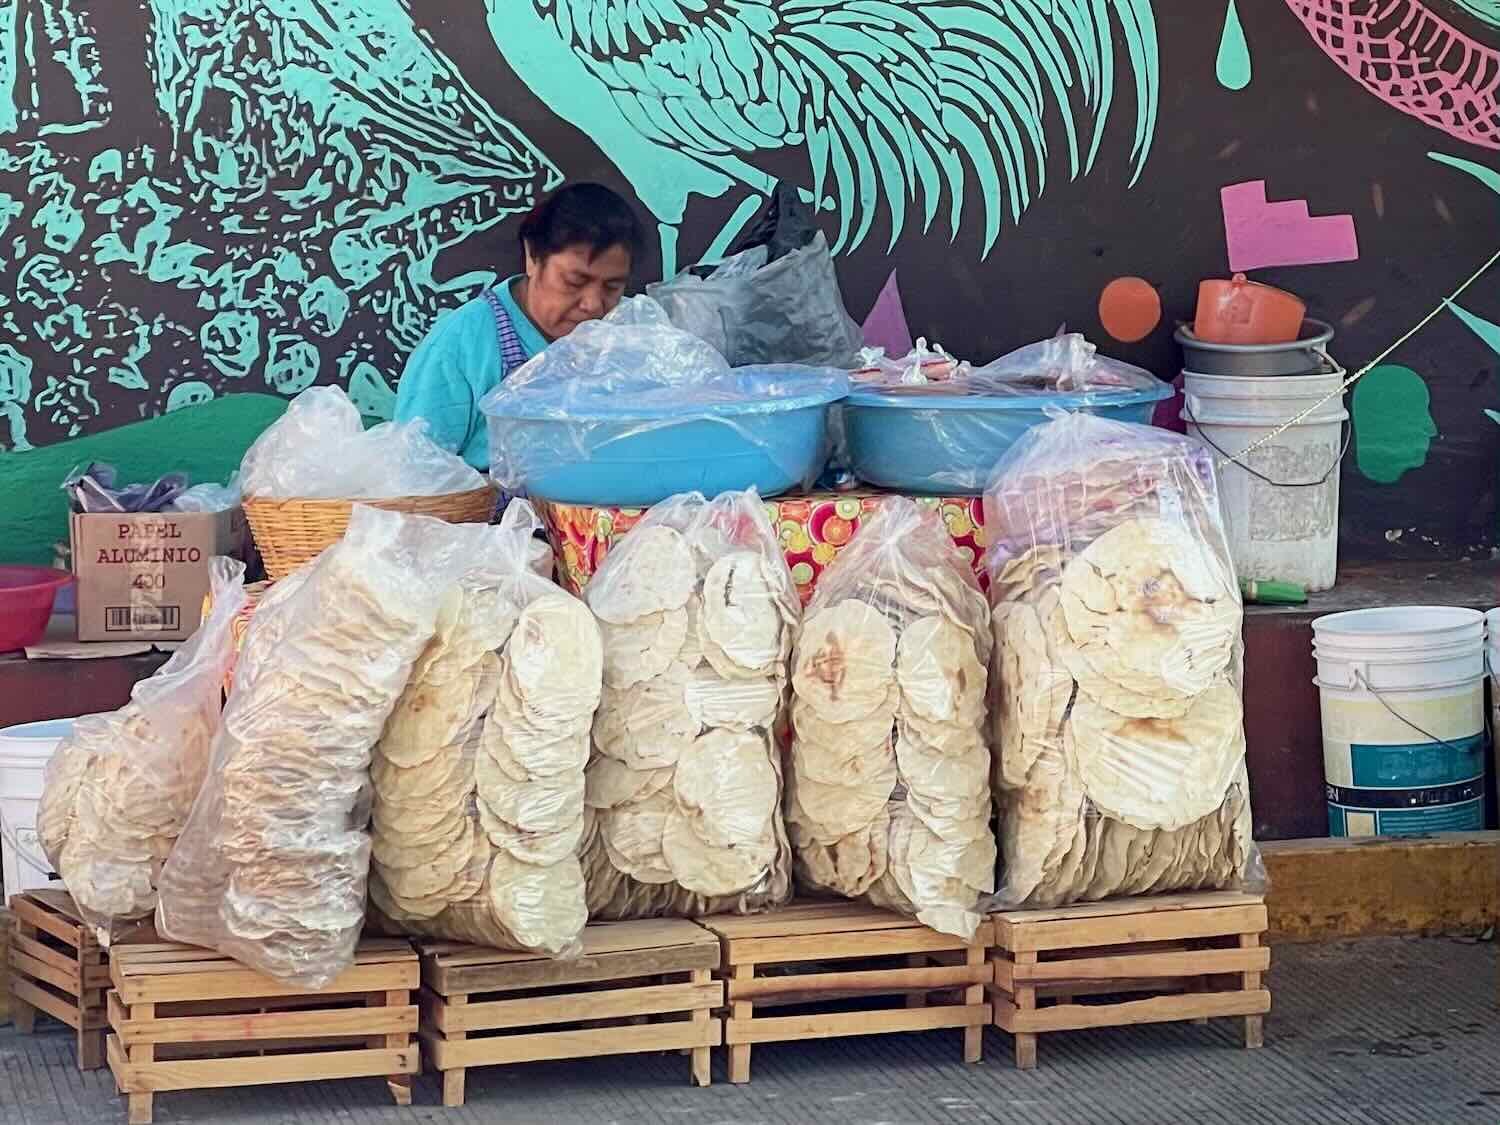 Oaxaca is famous for its over-sized tortillas, called tlayudas. This vendor sold a variety of sizes.